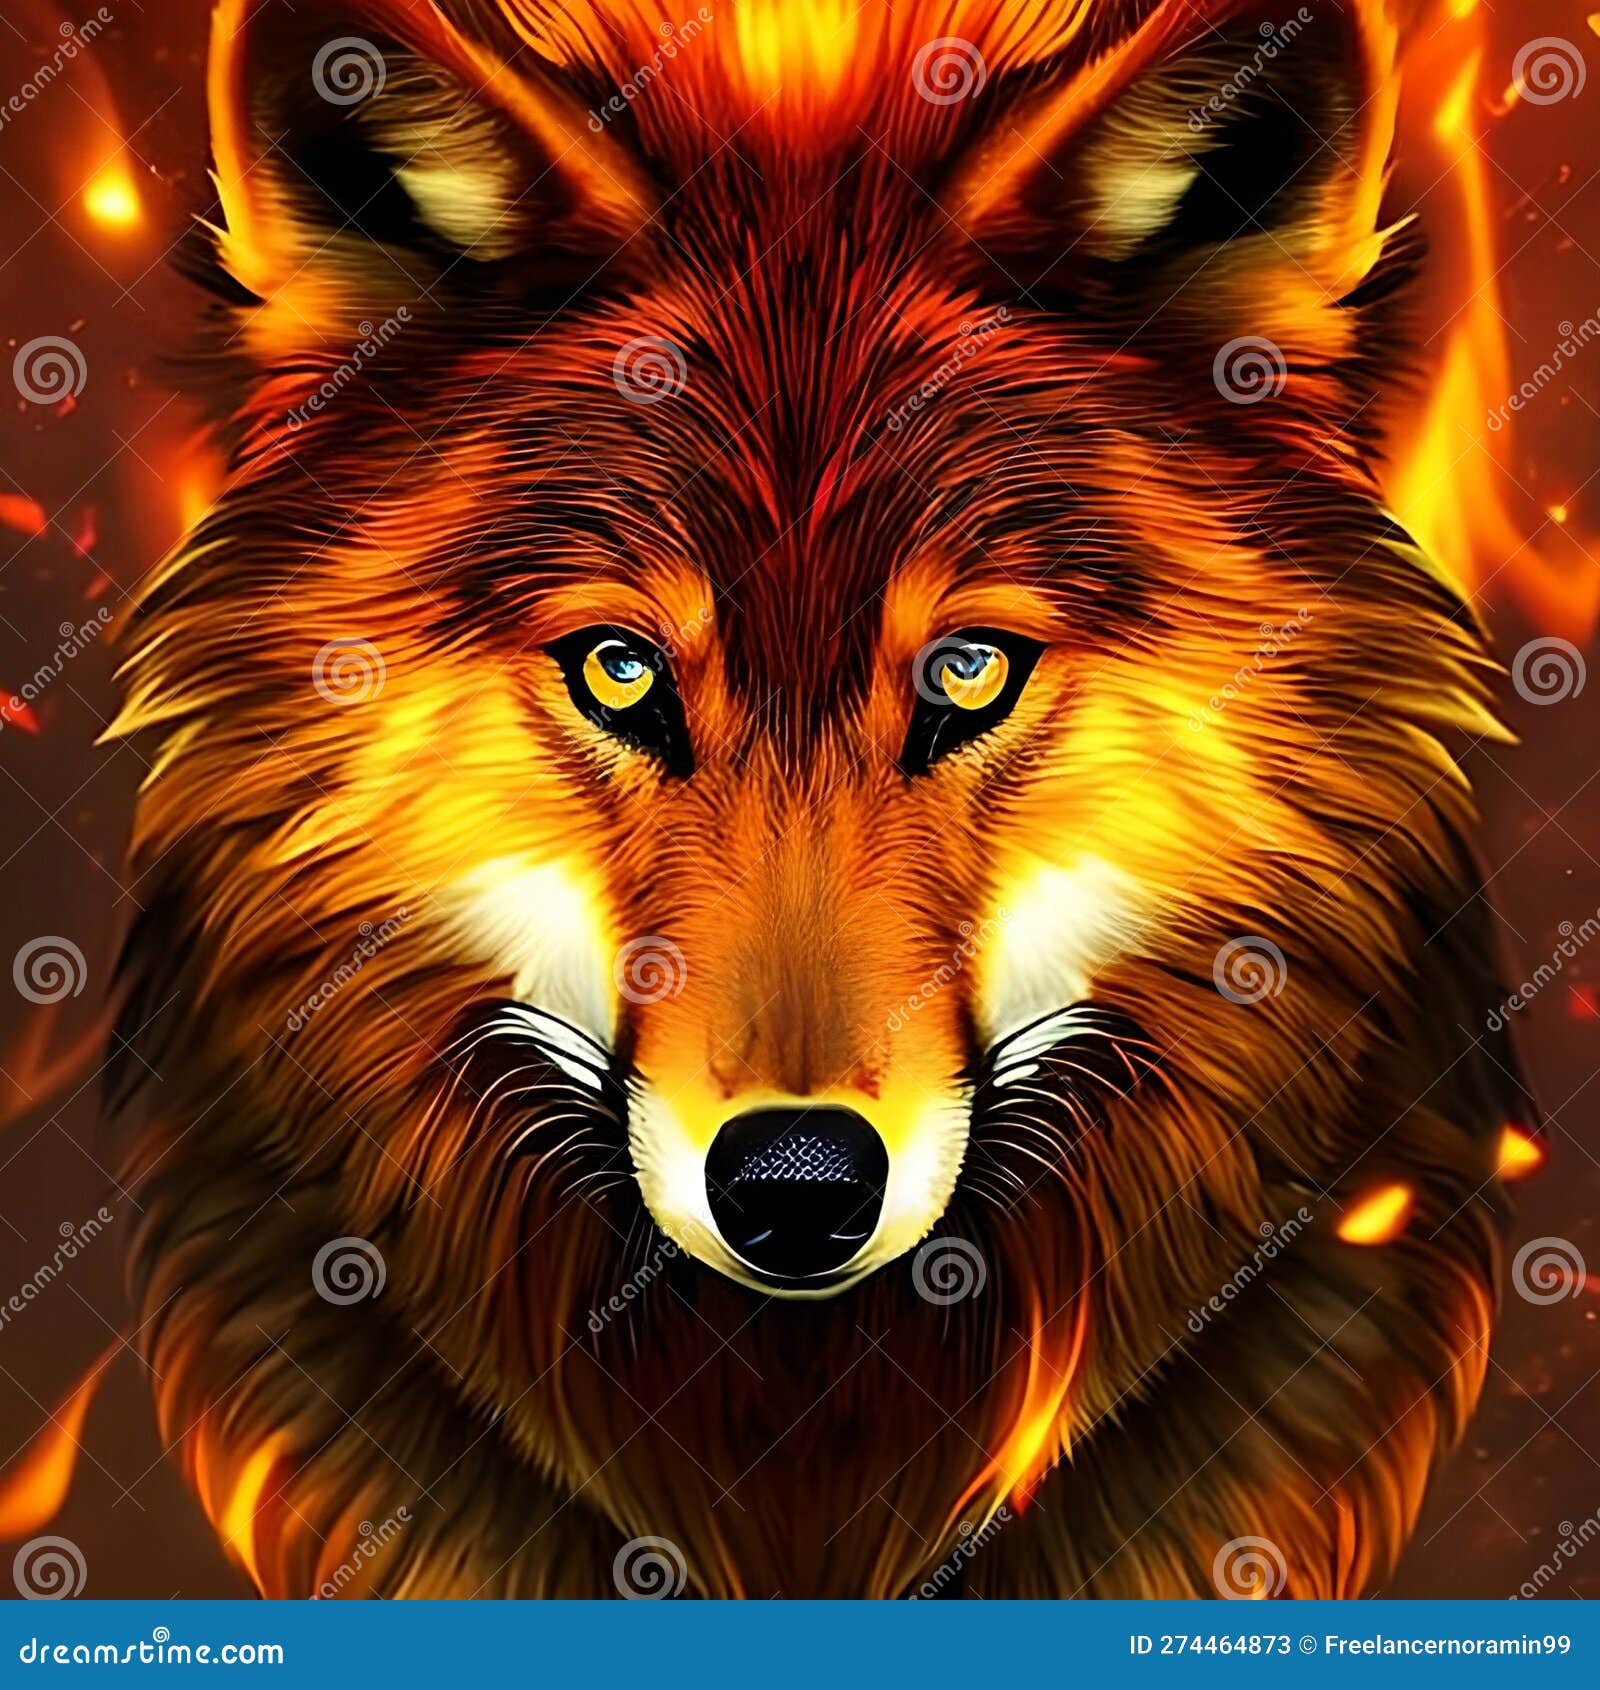 Share 64+ red wolf wallpaper - in.cdgdbentre